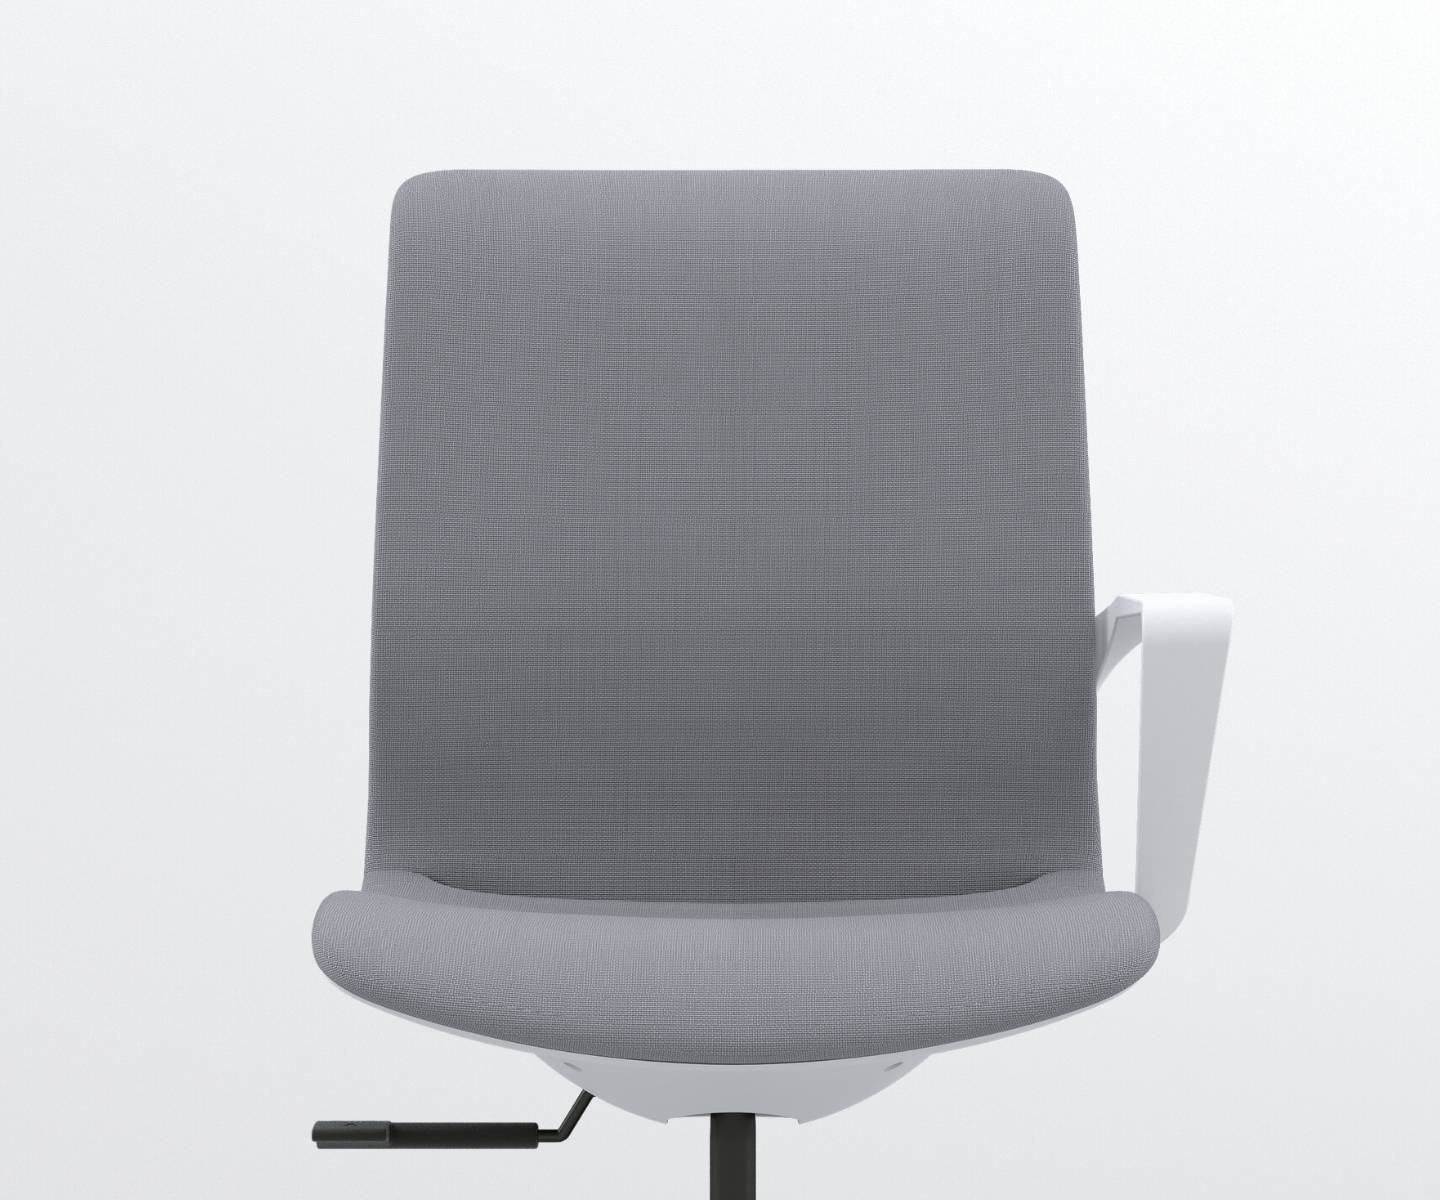 Available with and without armrests